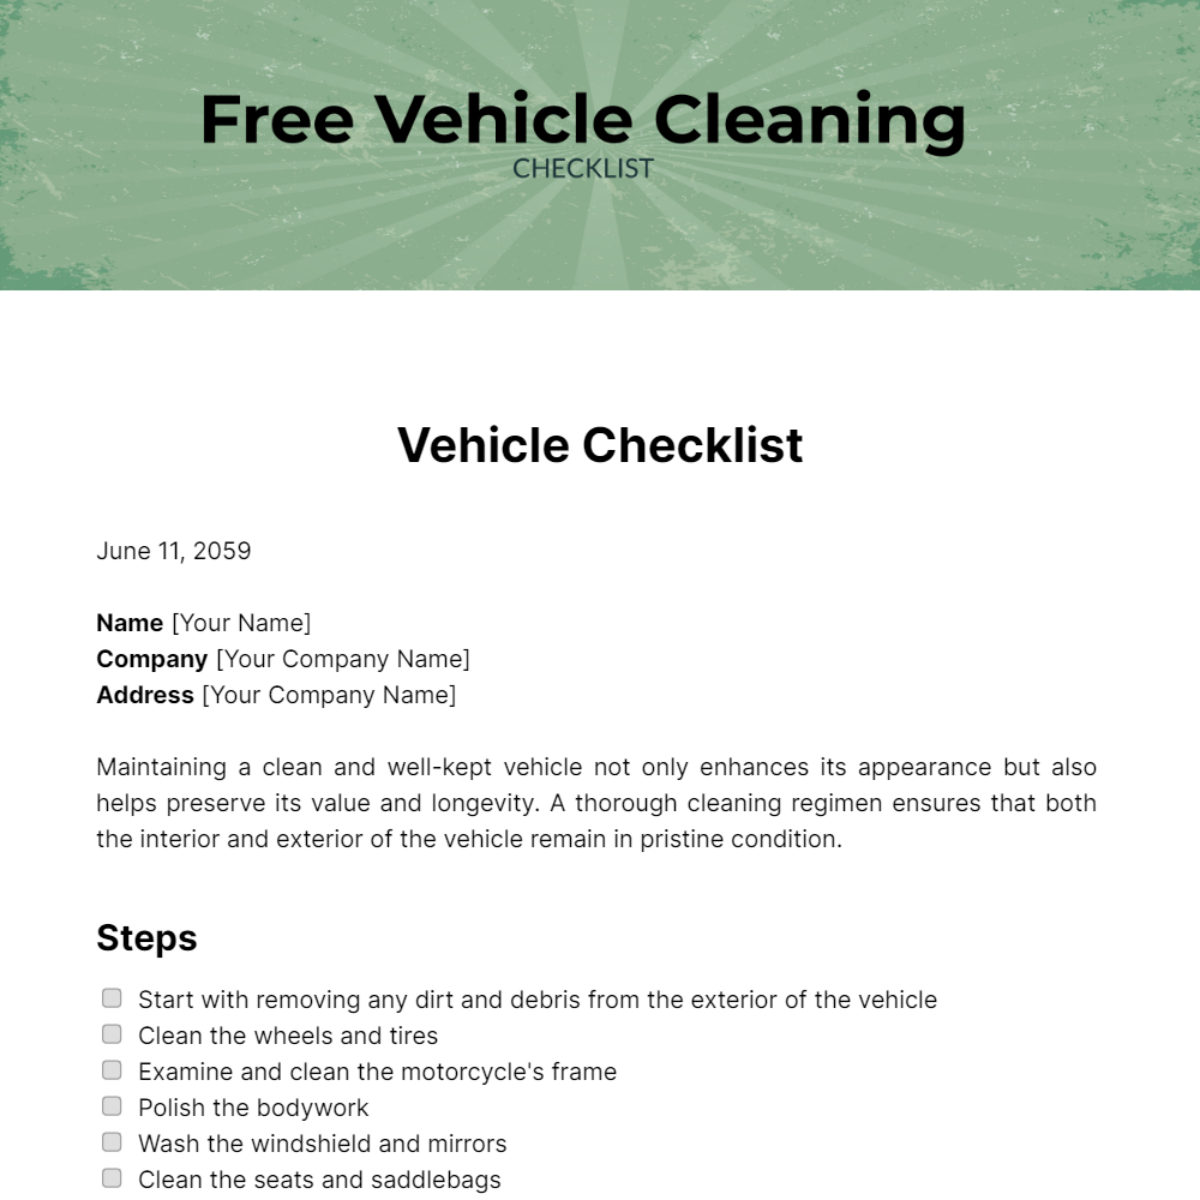 Free Vehicle Cleaning Checklist Template